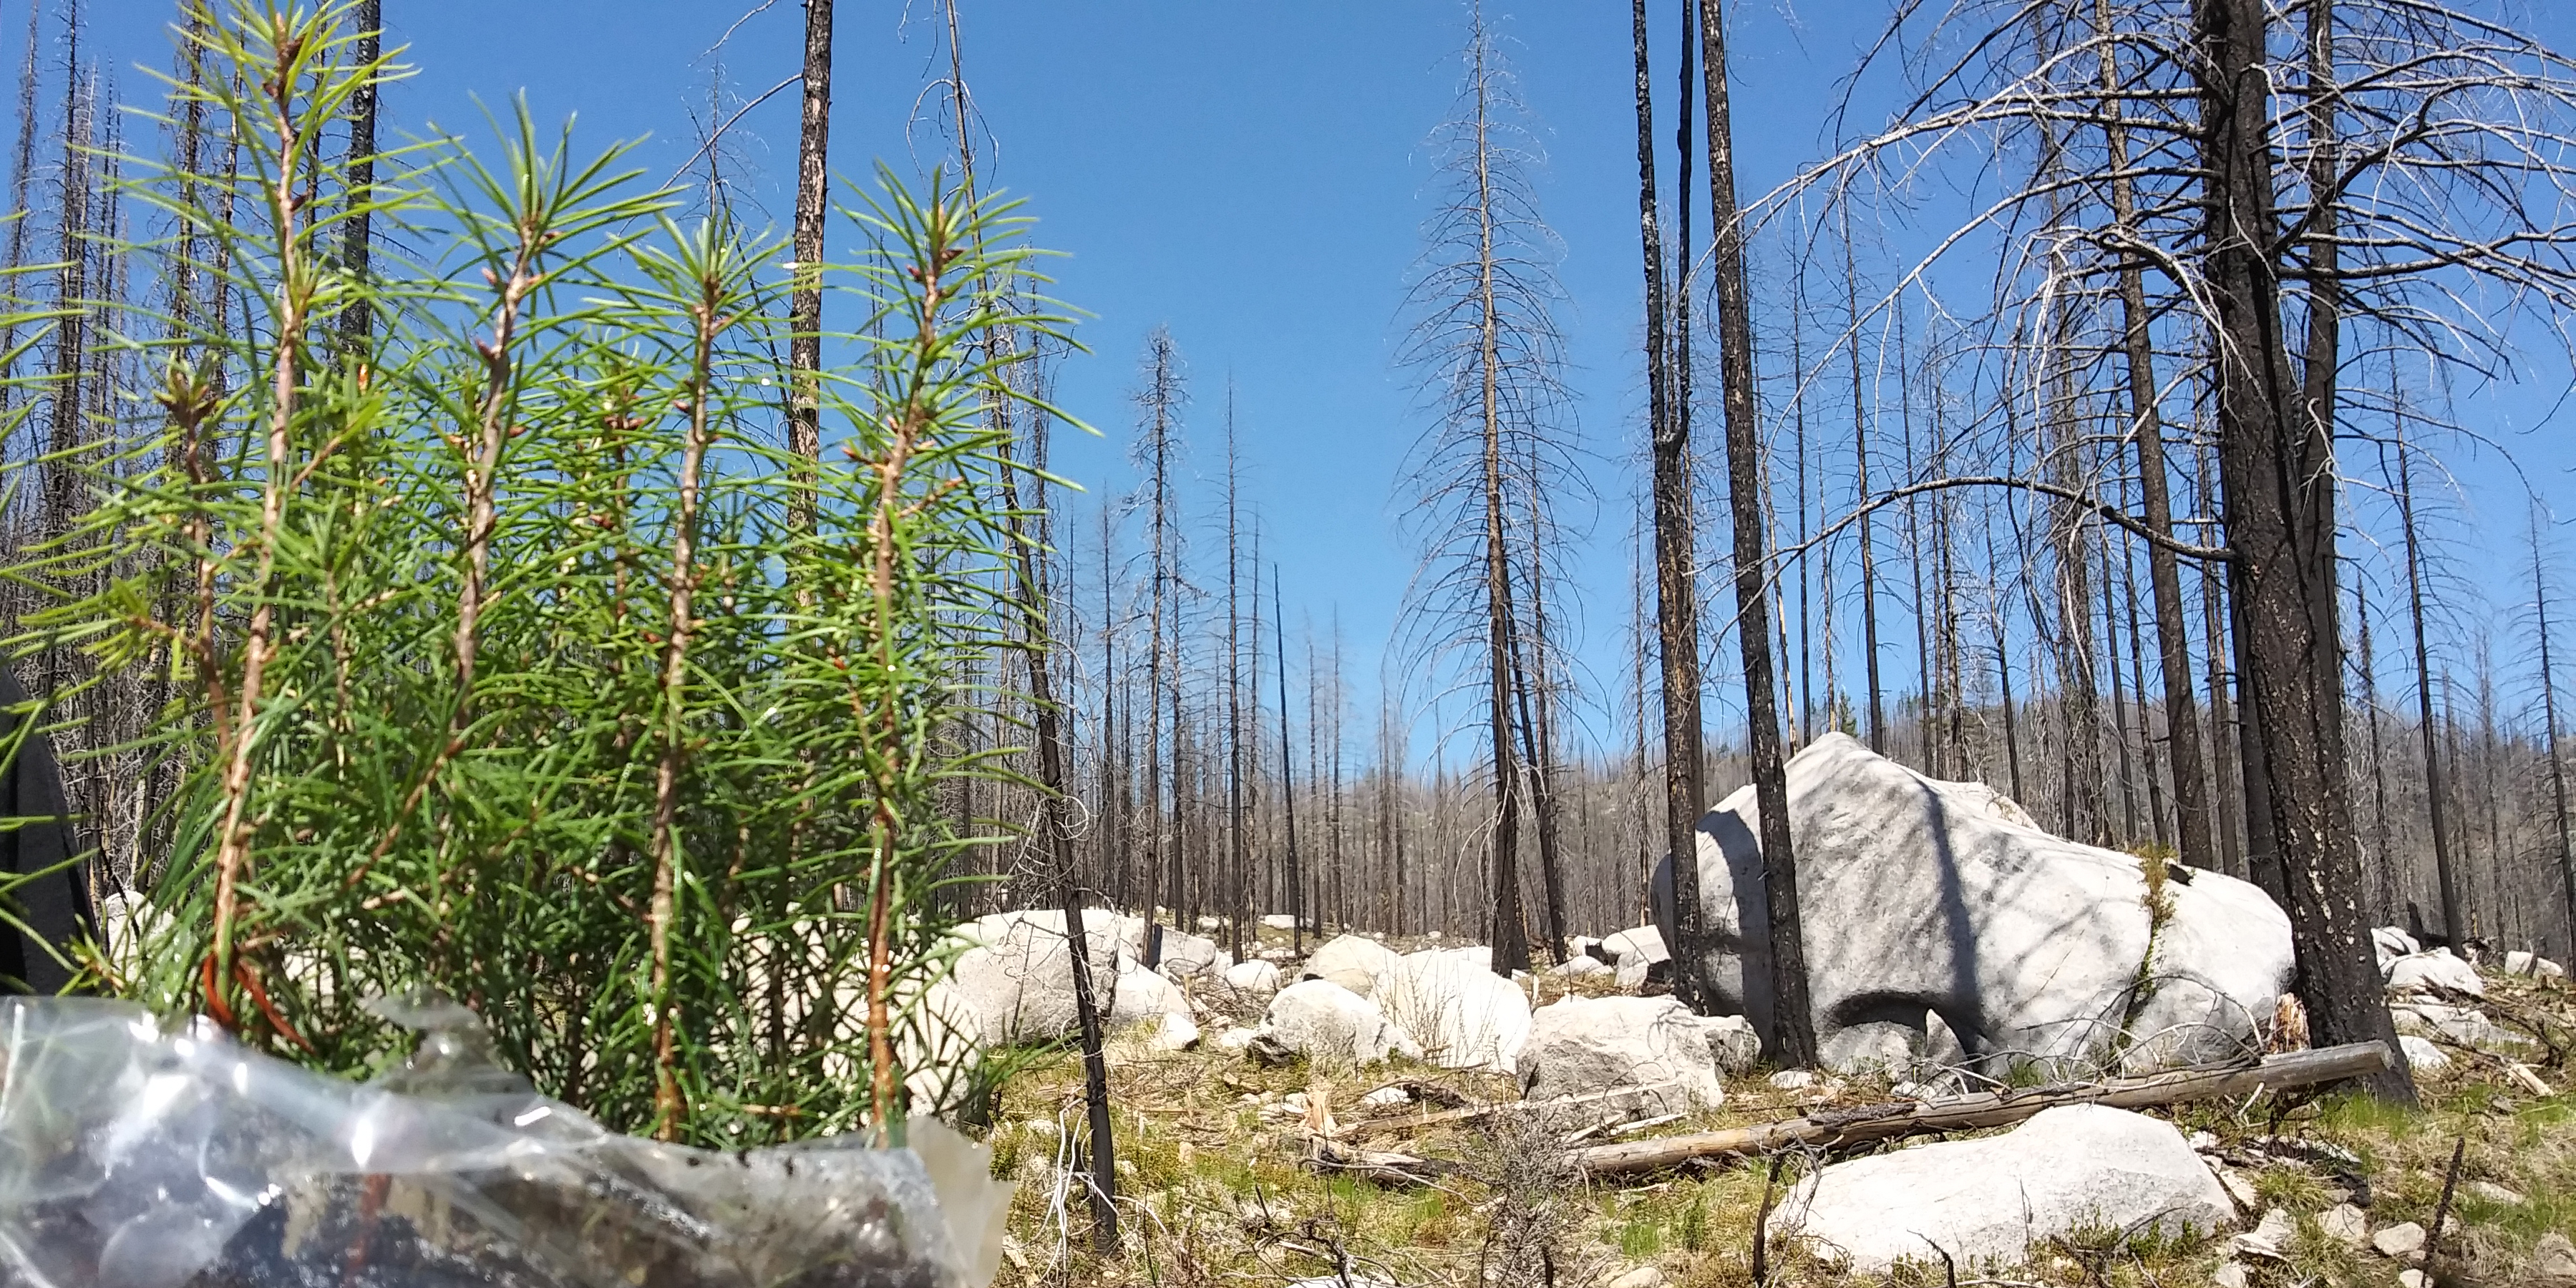 Seedlings sit in a bag before a forest of recently burned snags.